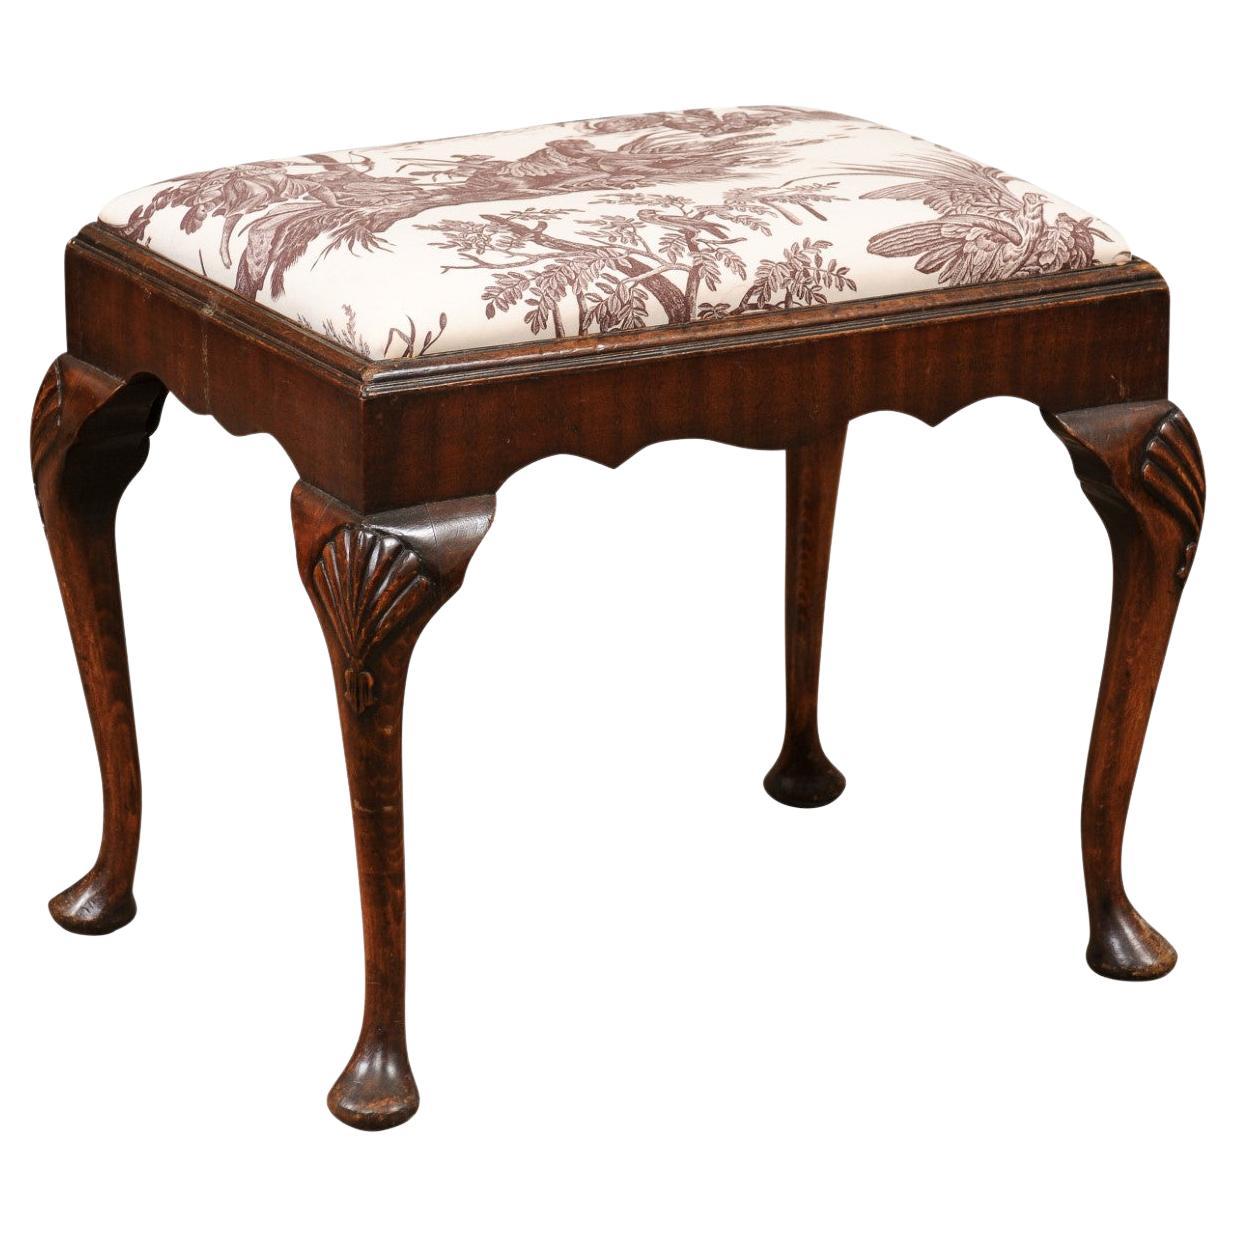 English Queen Anne Style Walnut Stool with Slip Seat, Early 20th Century For Sale